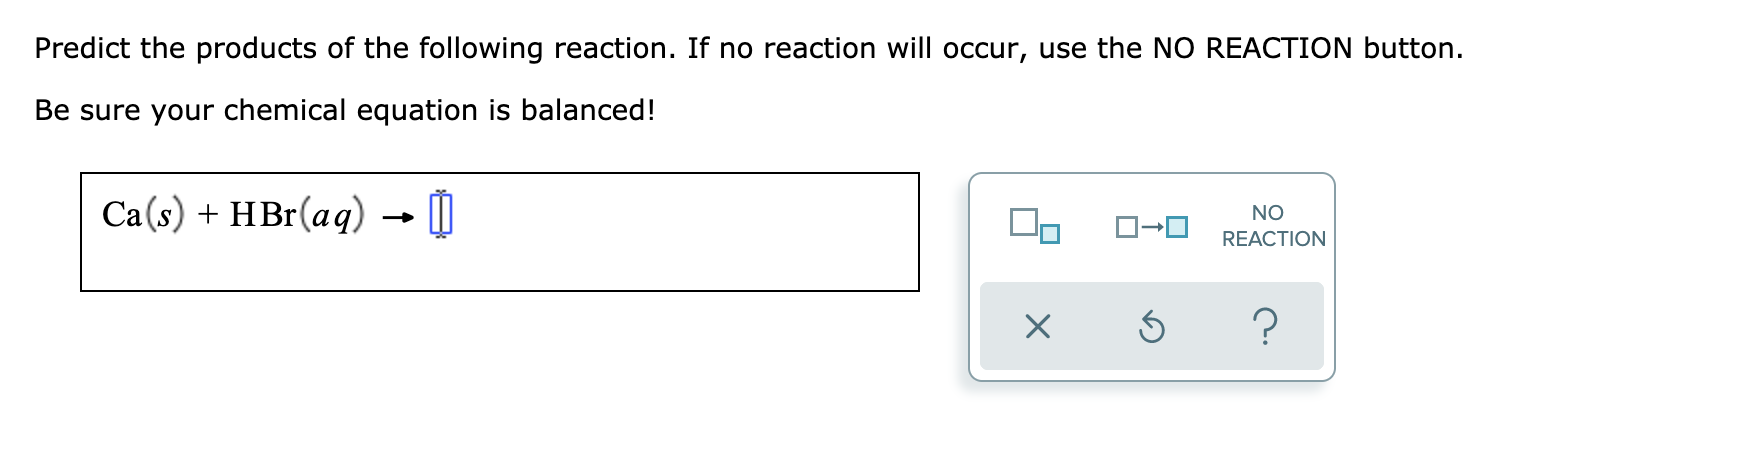 Predict the products of the following reaction. If no reaction will occur, use the NO REACTION button.
Be sure your chemical equation is balanced!
Ca(s) + HBr(aq) → 0
NO
REACTION
